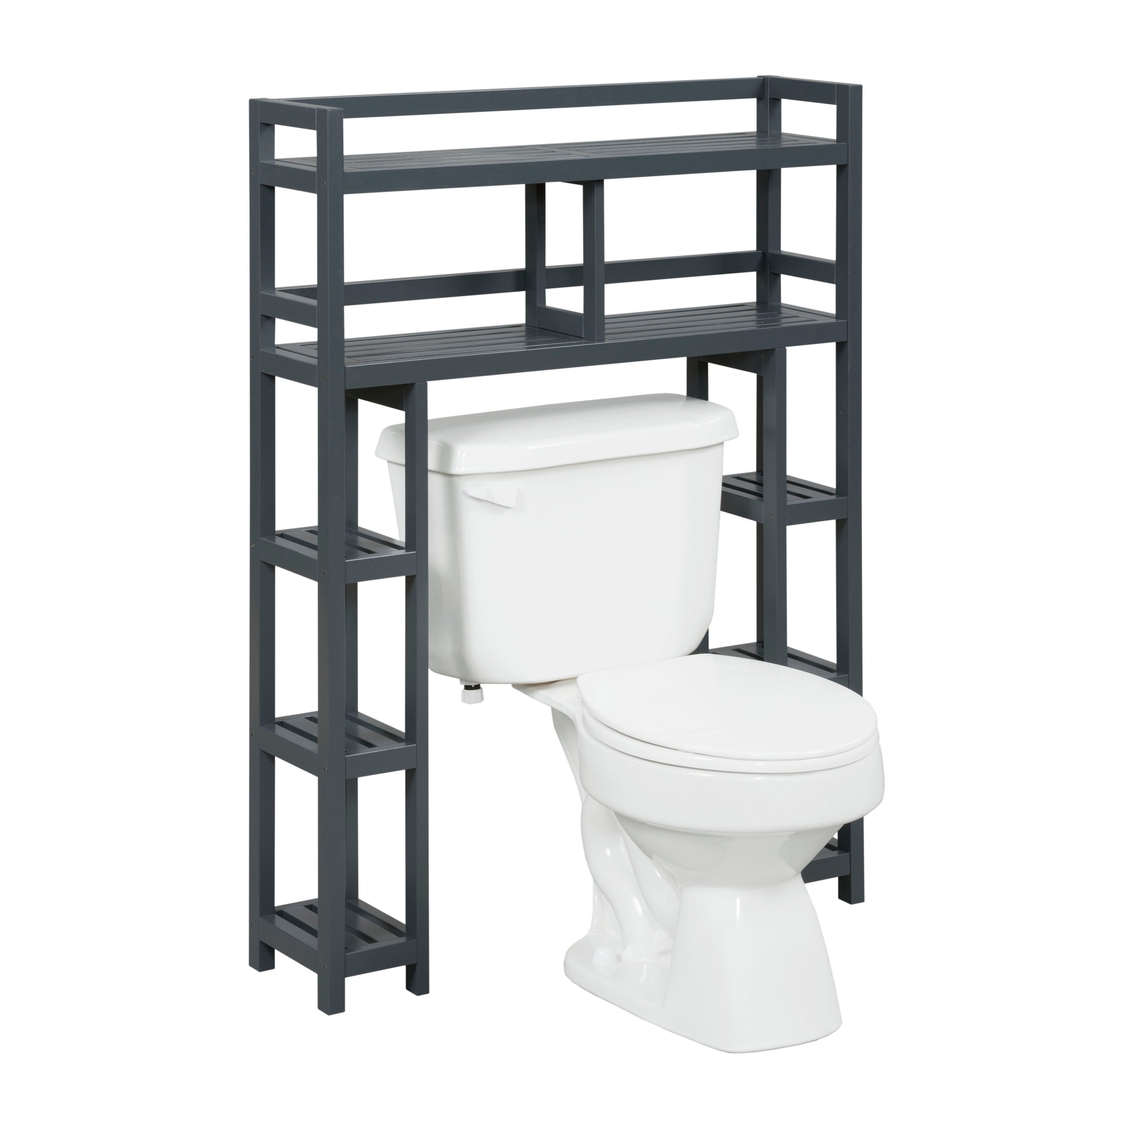 Dunnsville Solid Wood Over-Toilet Storage Space Saver with 6-Side Shelves, Espresso - Image 3 of 4